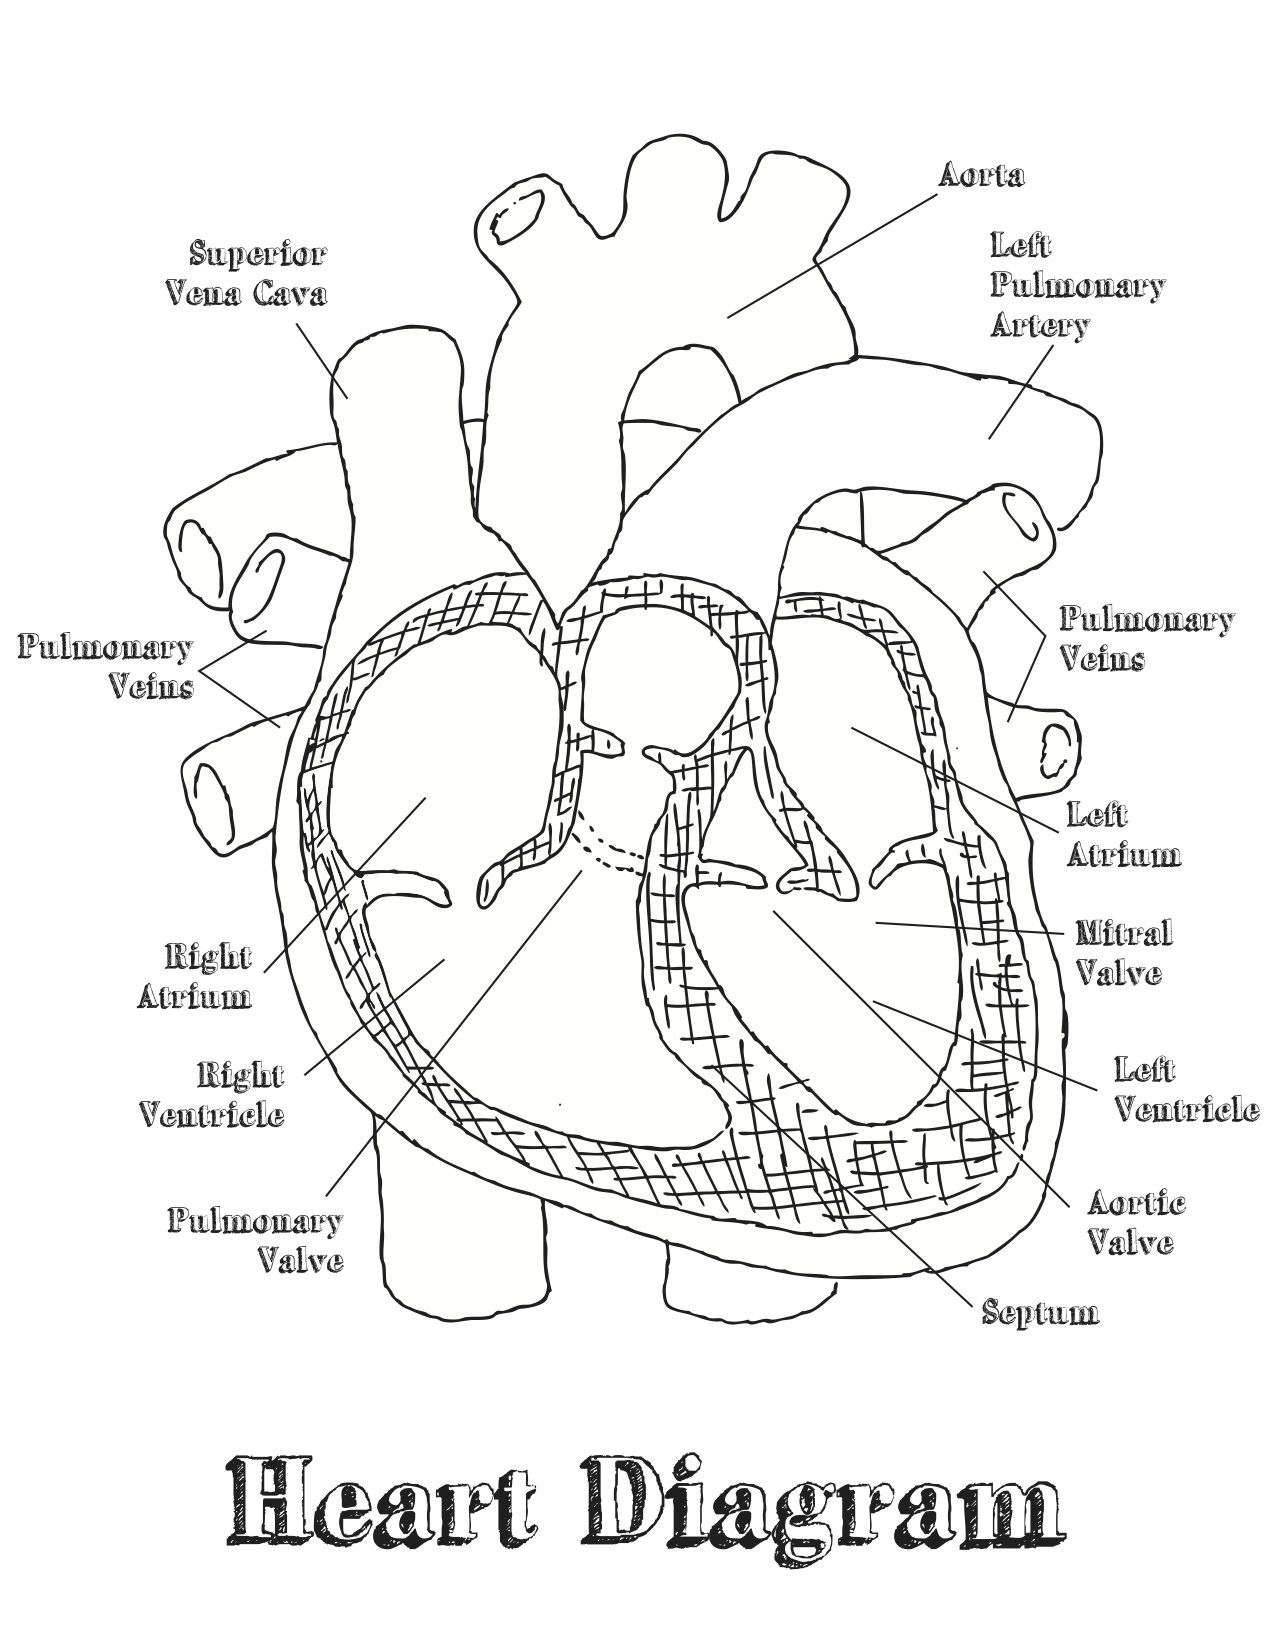 Heart Diagram Labeled Worksheet - Google Search | Home School | Heart Diagram Printable Worksheet